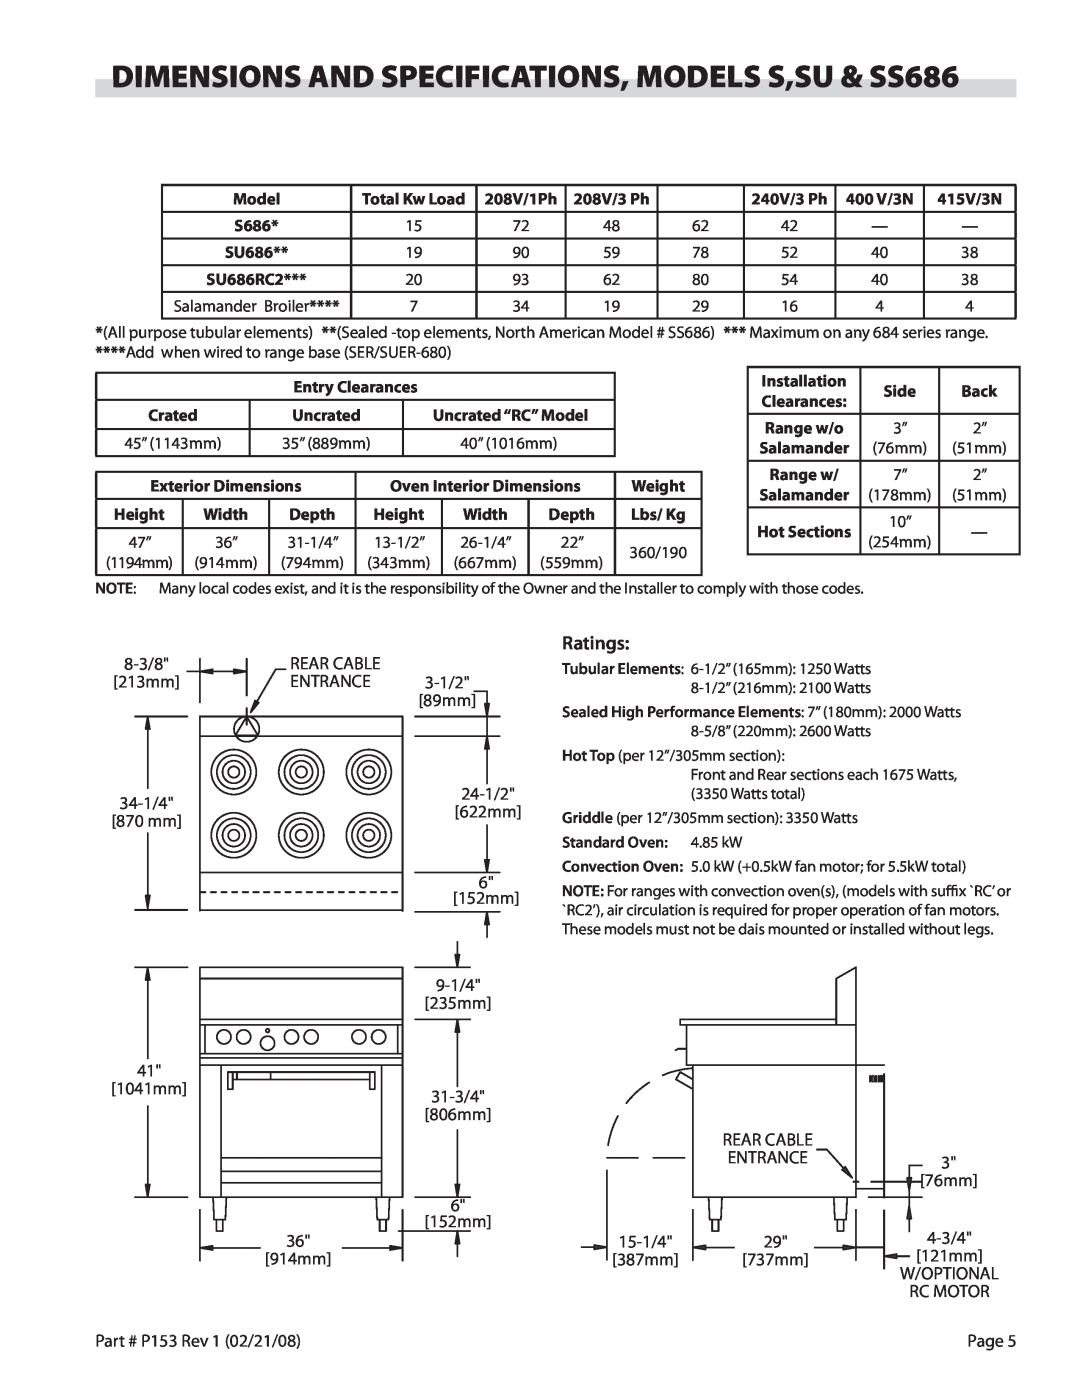 Garland SS680, SU680 operation manual DIMENSIONS AND SPECIFICATIONS, MODELS S,SU & SS686, Ratings 